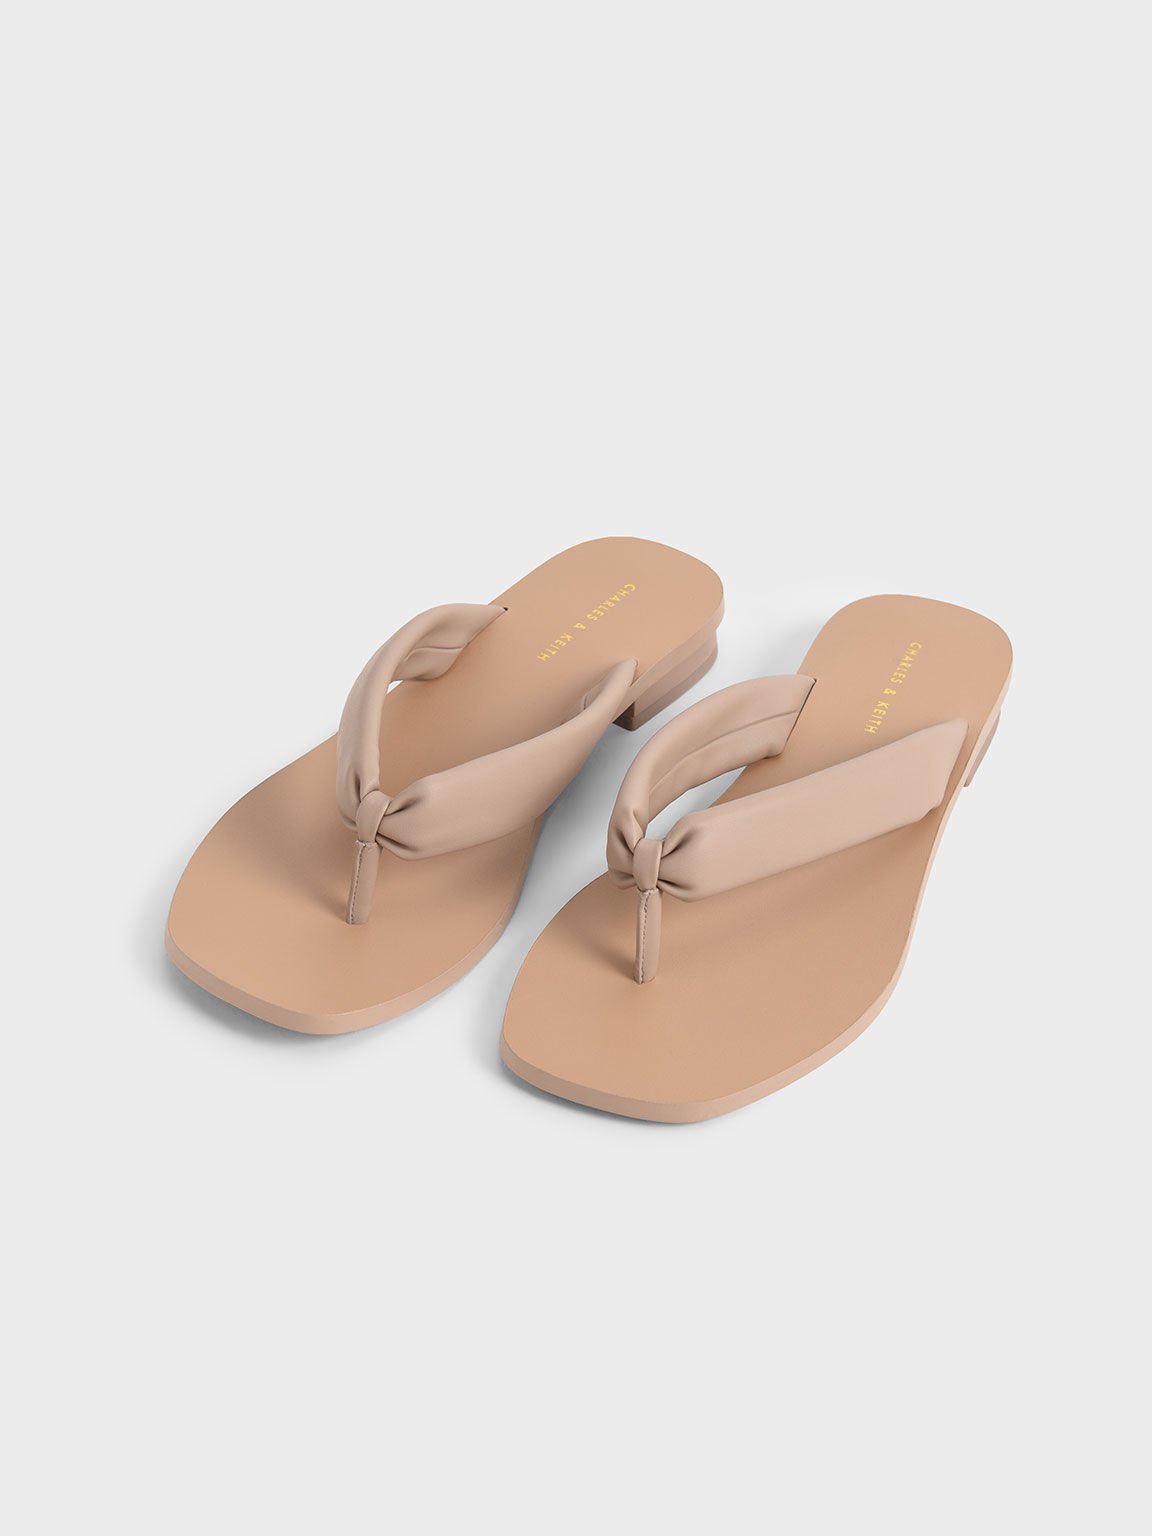 Puffy Strap Thong Sandals, Nude, hi-res